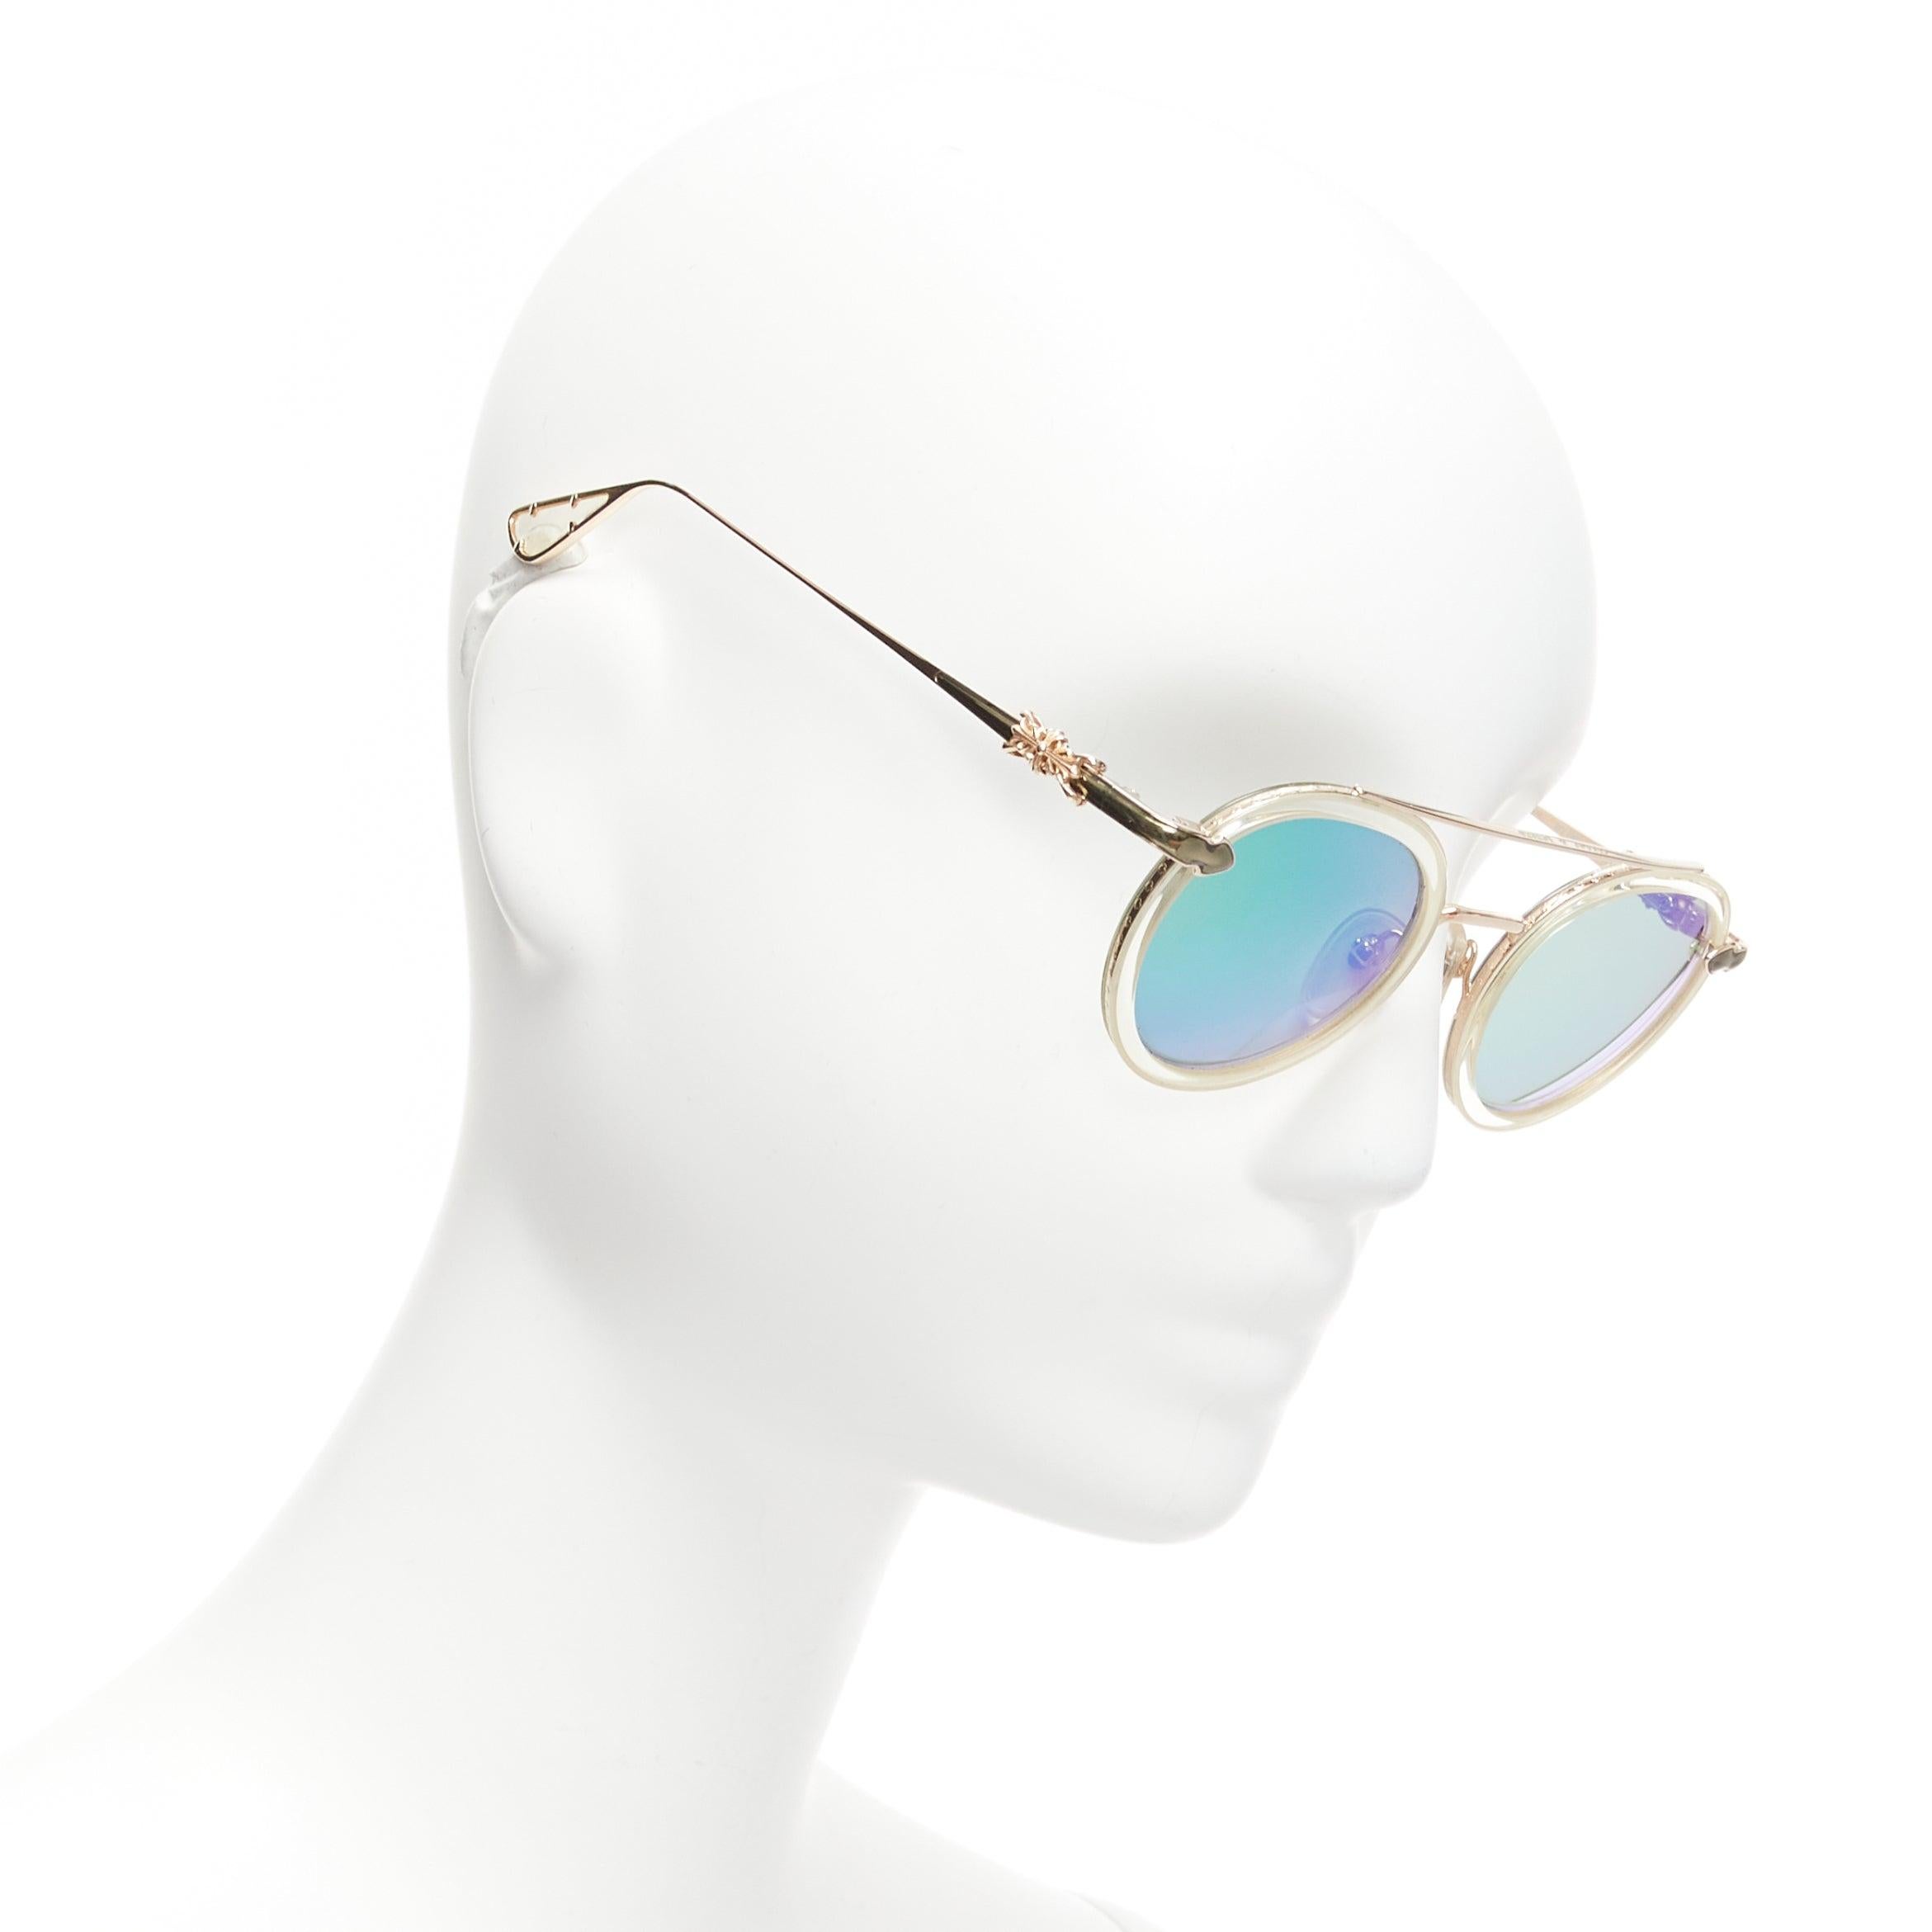 CHROME HEARTS Bo'jmir II reflective green lens clear frame sunglasses
Reference: NKLL/A00078
Brand: Chrome Hearts
Model: Bo'jmir II
Material: Plastic
Color: Green, Gold
Pattern: Solid
Made in: Japan

CONDITION:
Condition: Very good, this item was